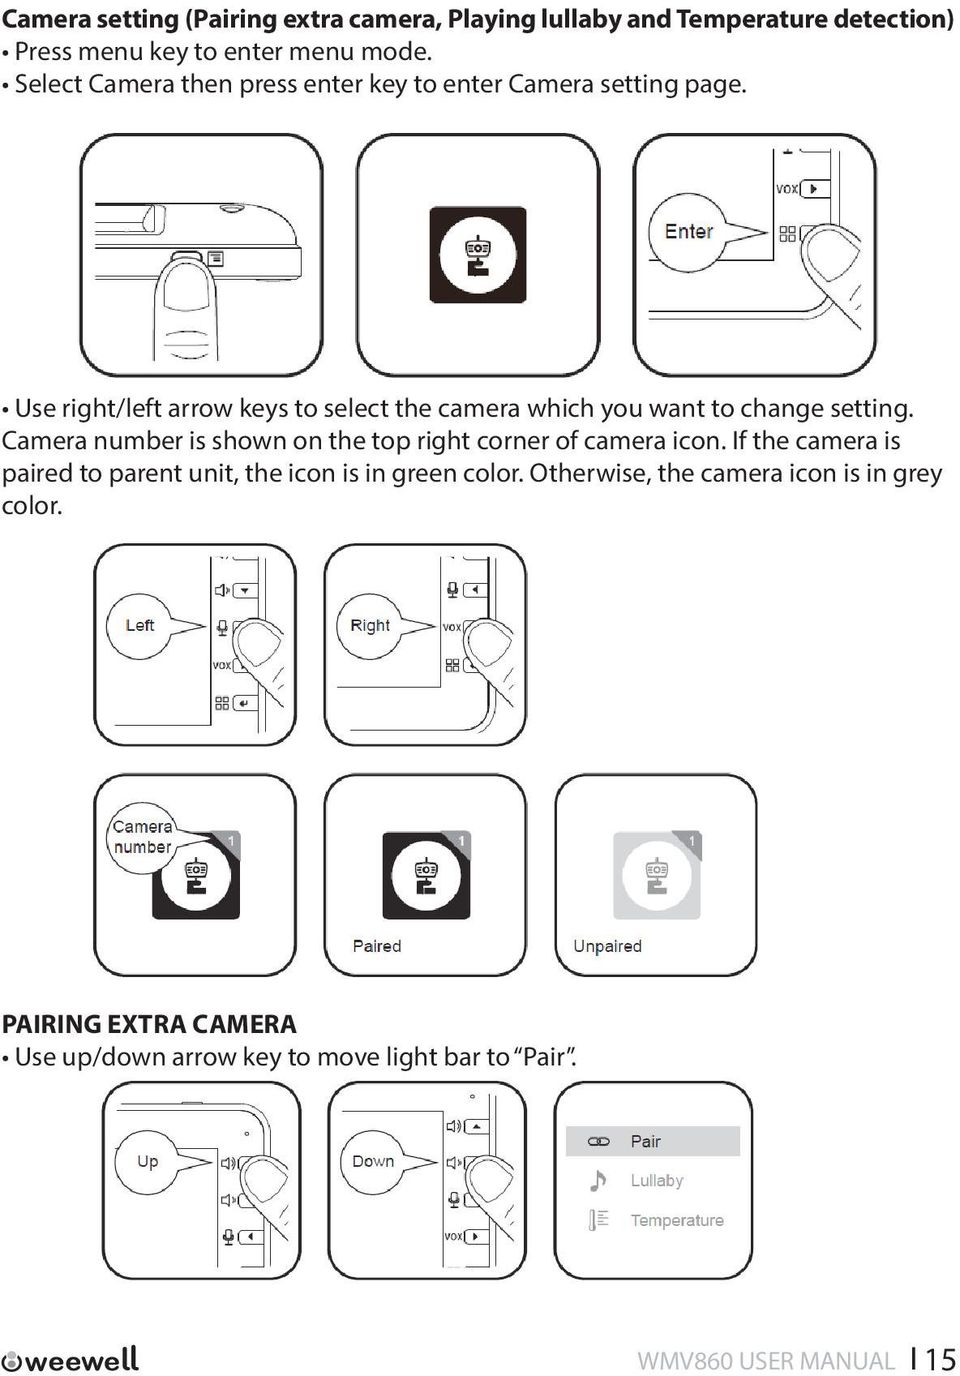 Use right/left arrow keys to select the camera which you want to change setting.